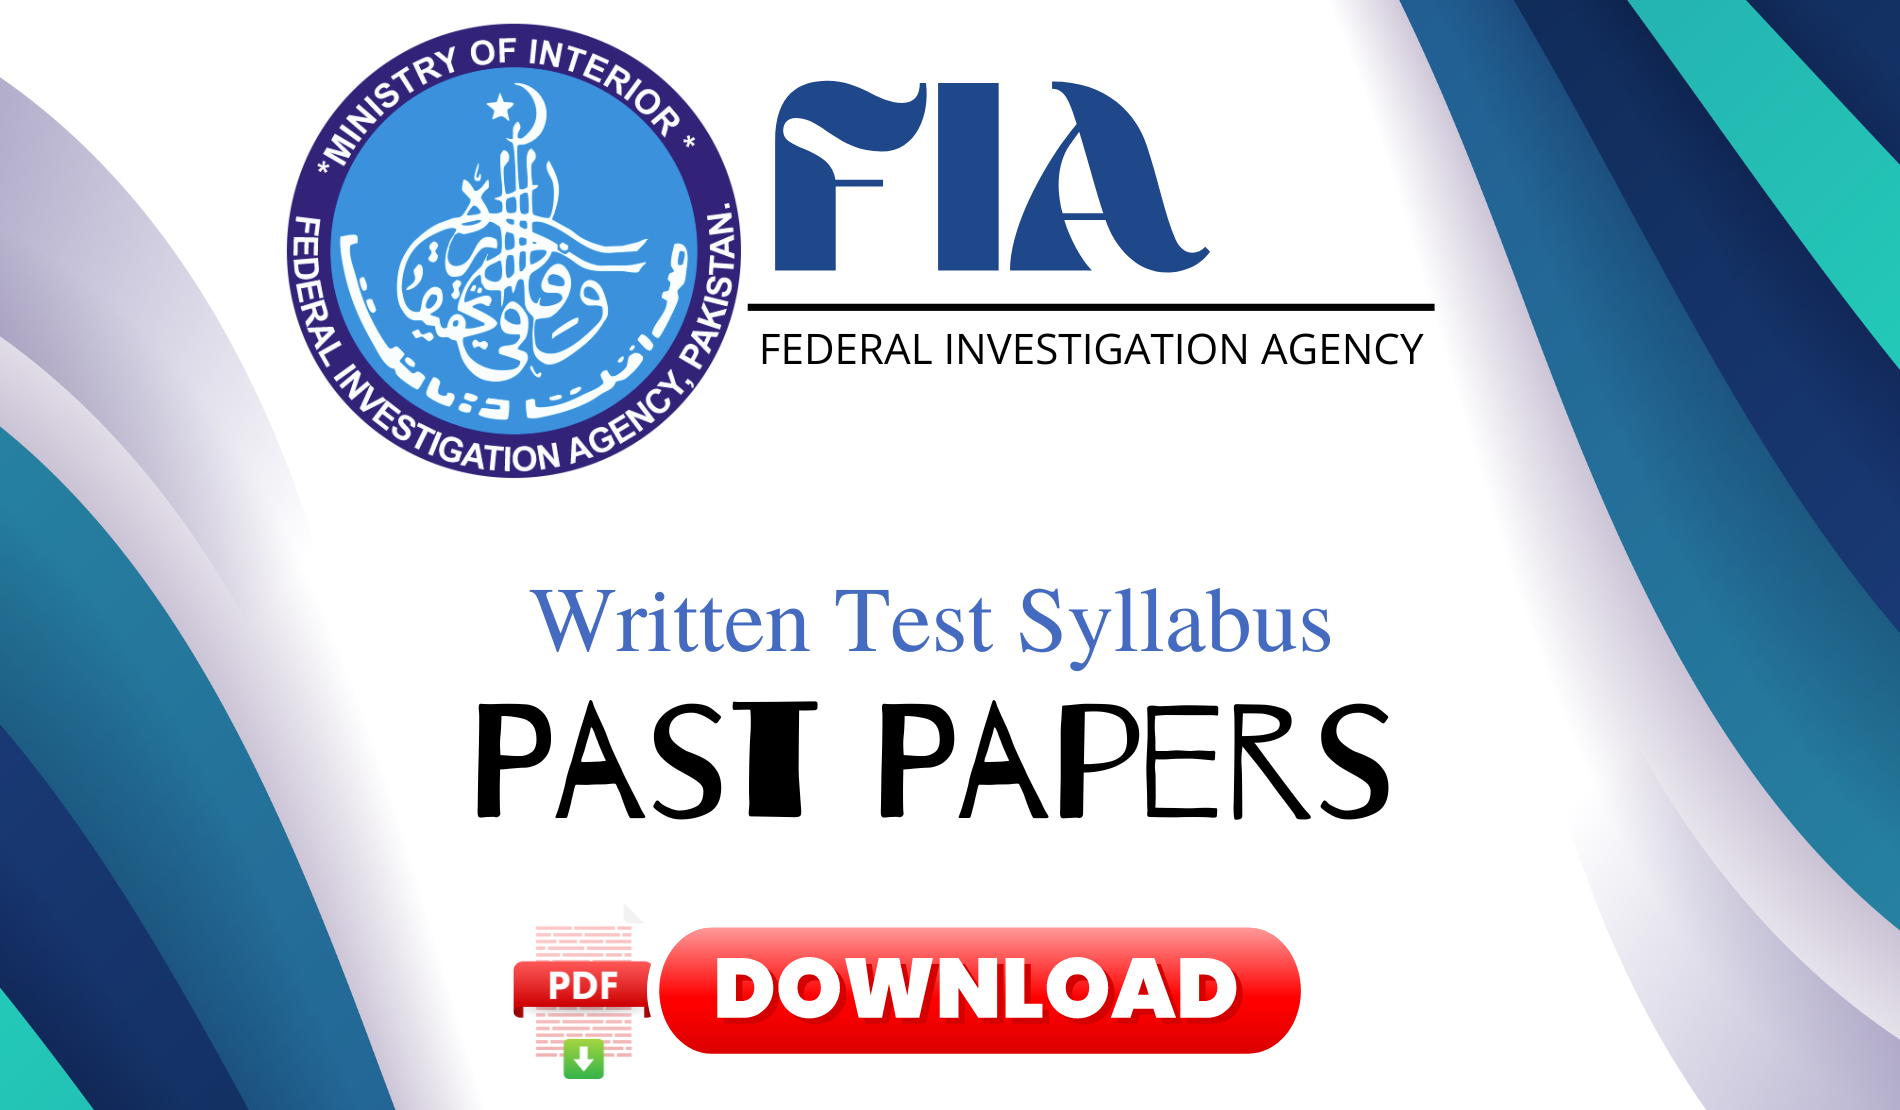 FIA Past Papers Books and Written Test Syllabus download